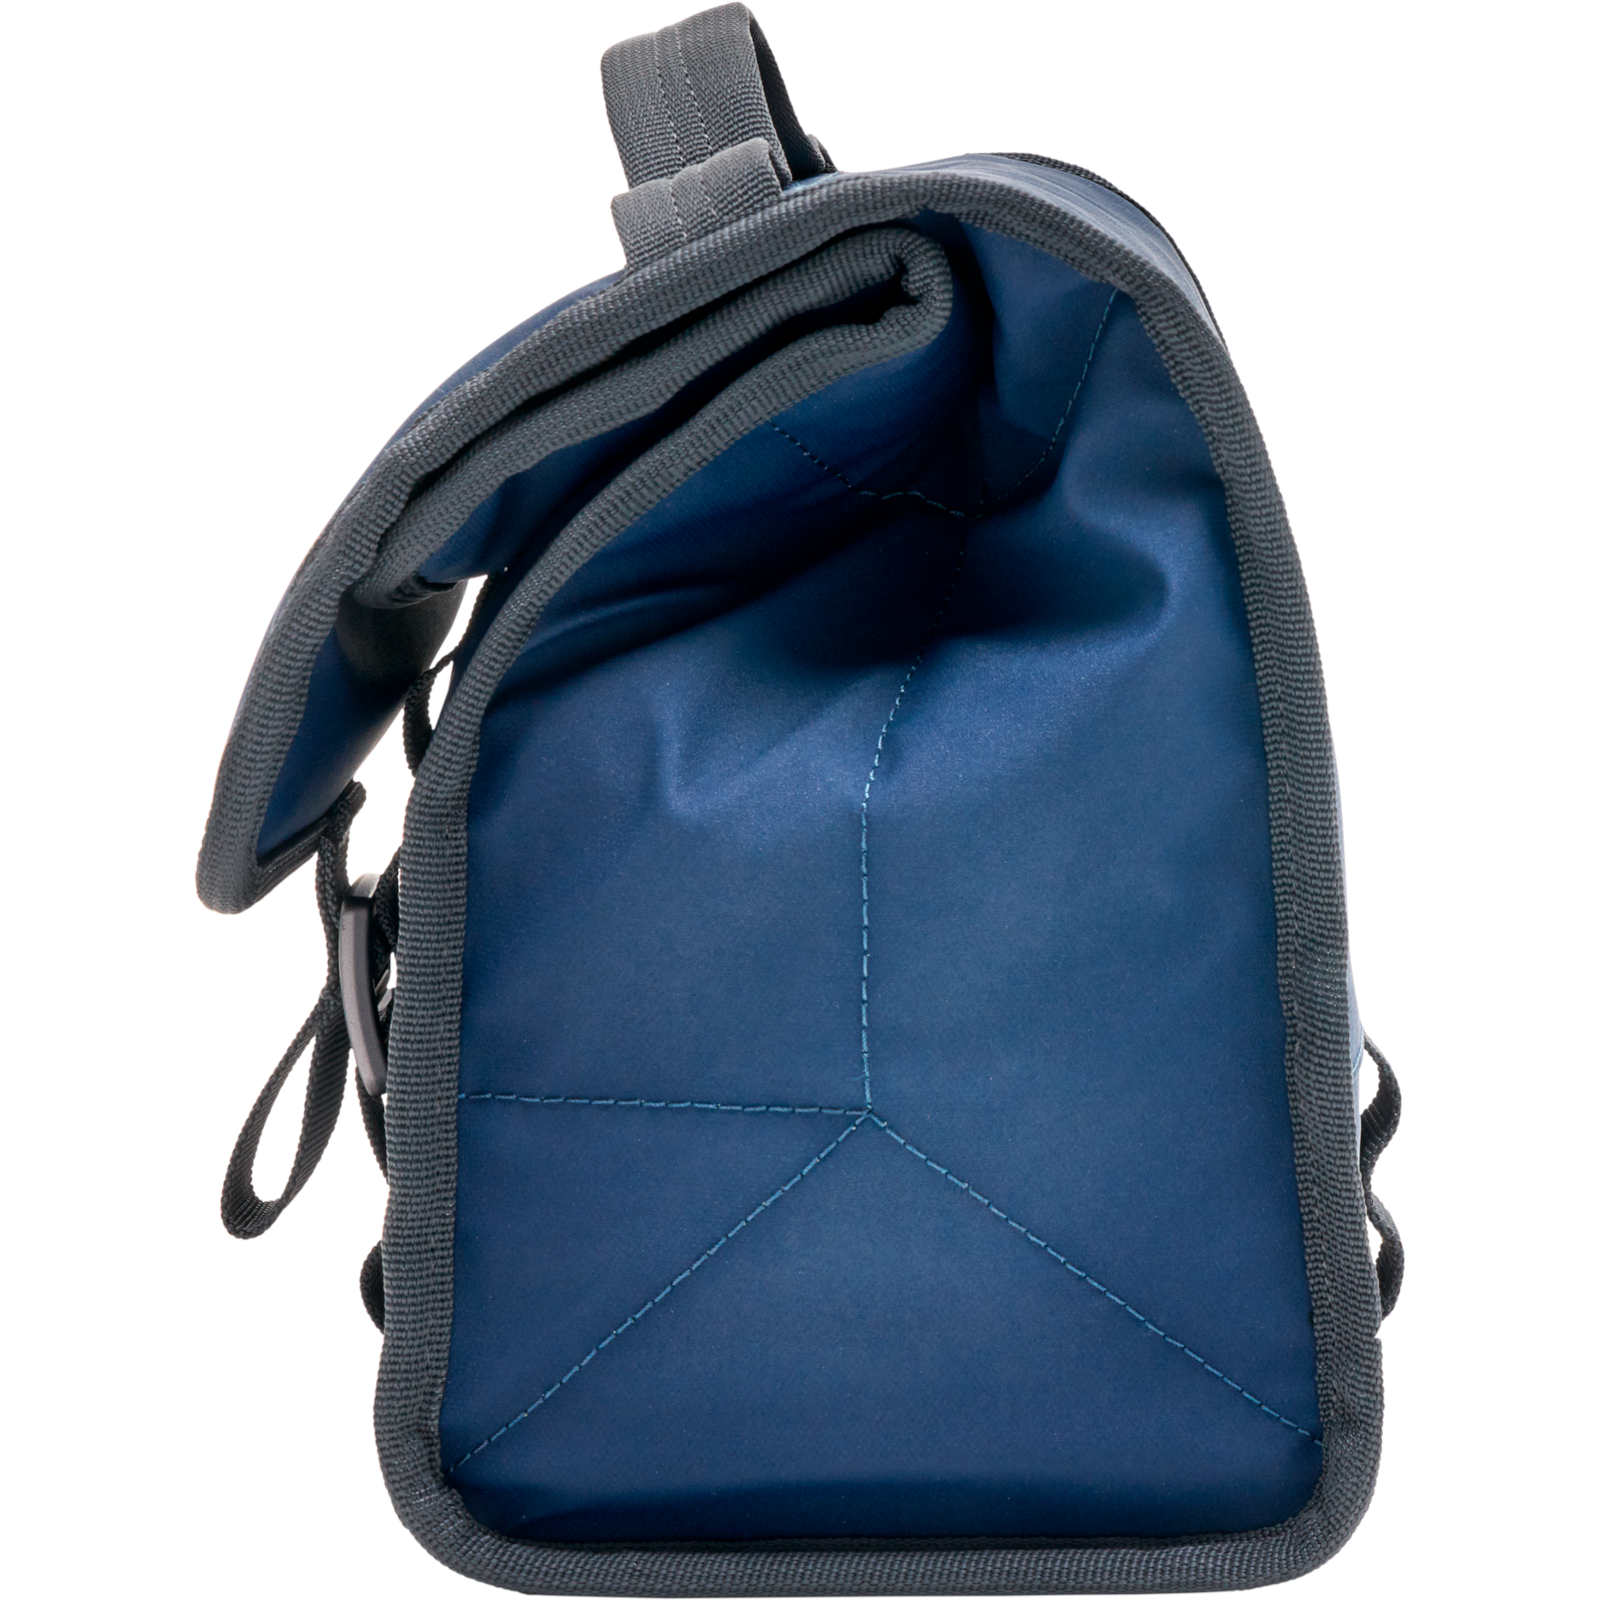 Product Yeti Day Trip Navy Blue Lunch Bag Standing Side Angle View